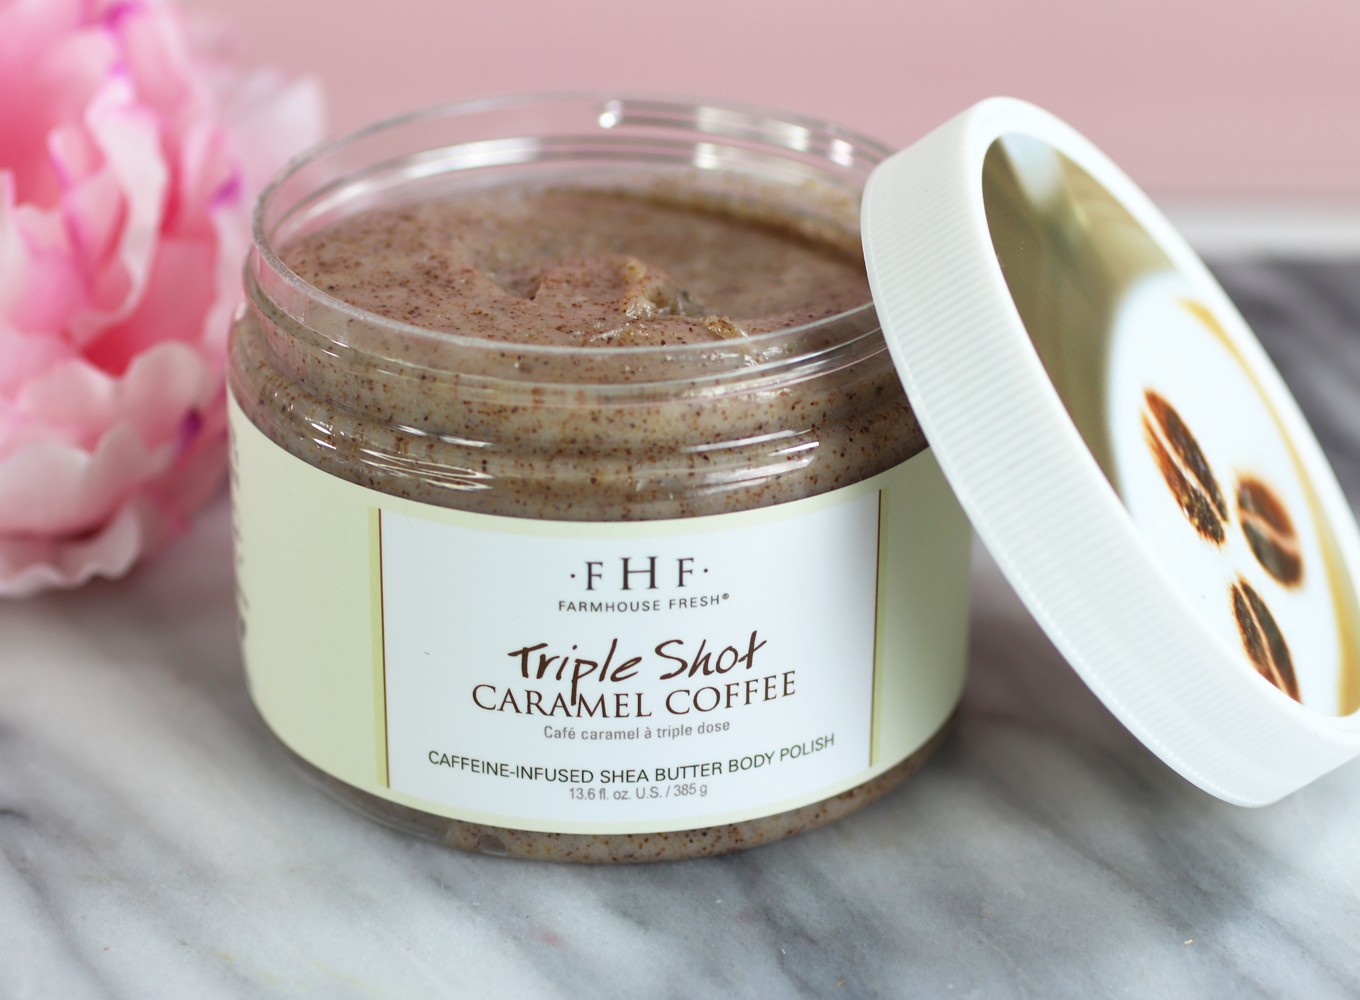 Farmhouse Fresh Triple Shot Caramel Coffee Scrub Review - The Best Cruelty Free Hand Creams and Scrubs for Dry Winter Skin by LA cruelty free beauty blogger My Beauty Bunny